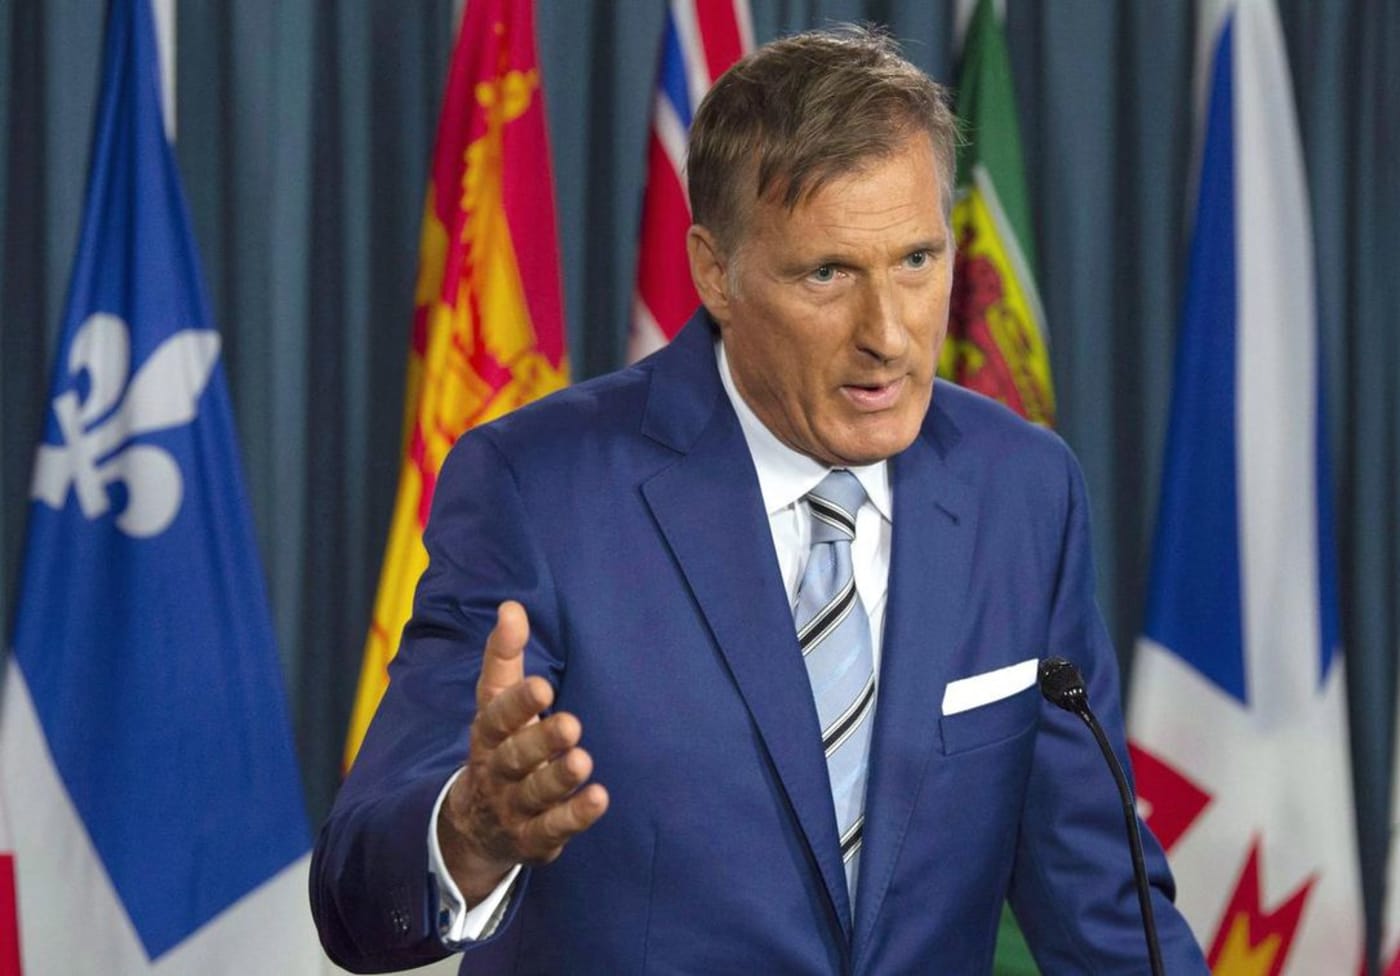 Maxime Bernier Launches 'The People's Party of Canada'